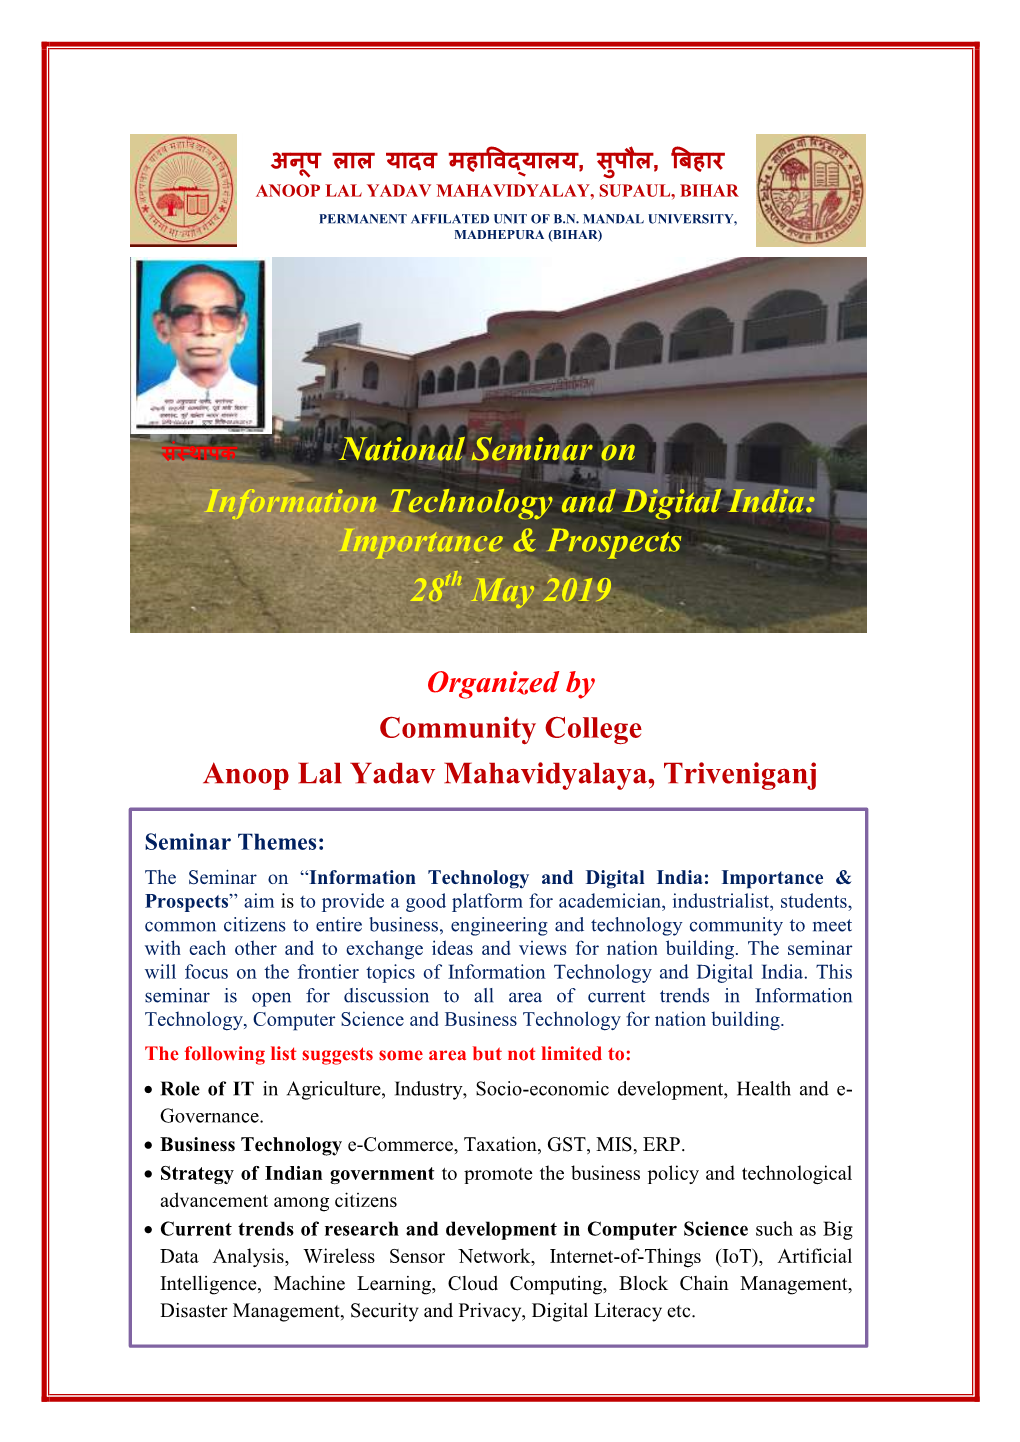 National Seminar on Information Technology and Digital India: Importance & Prospects 28Th May 2019